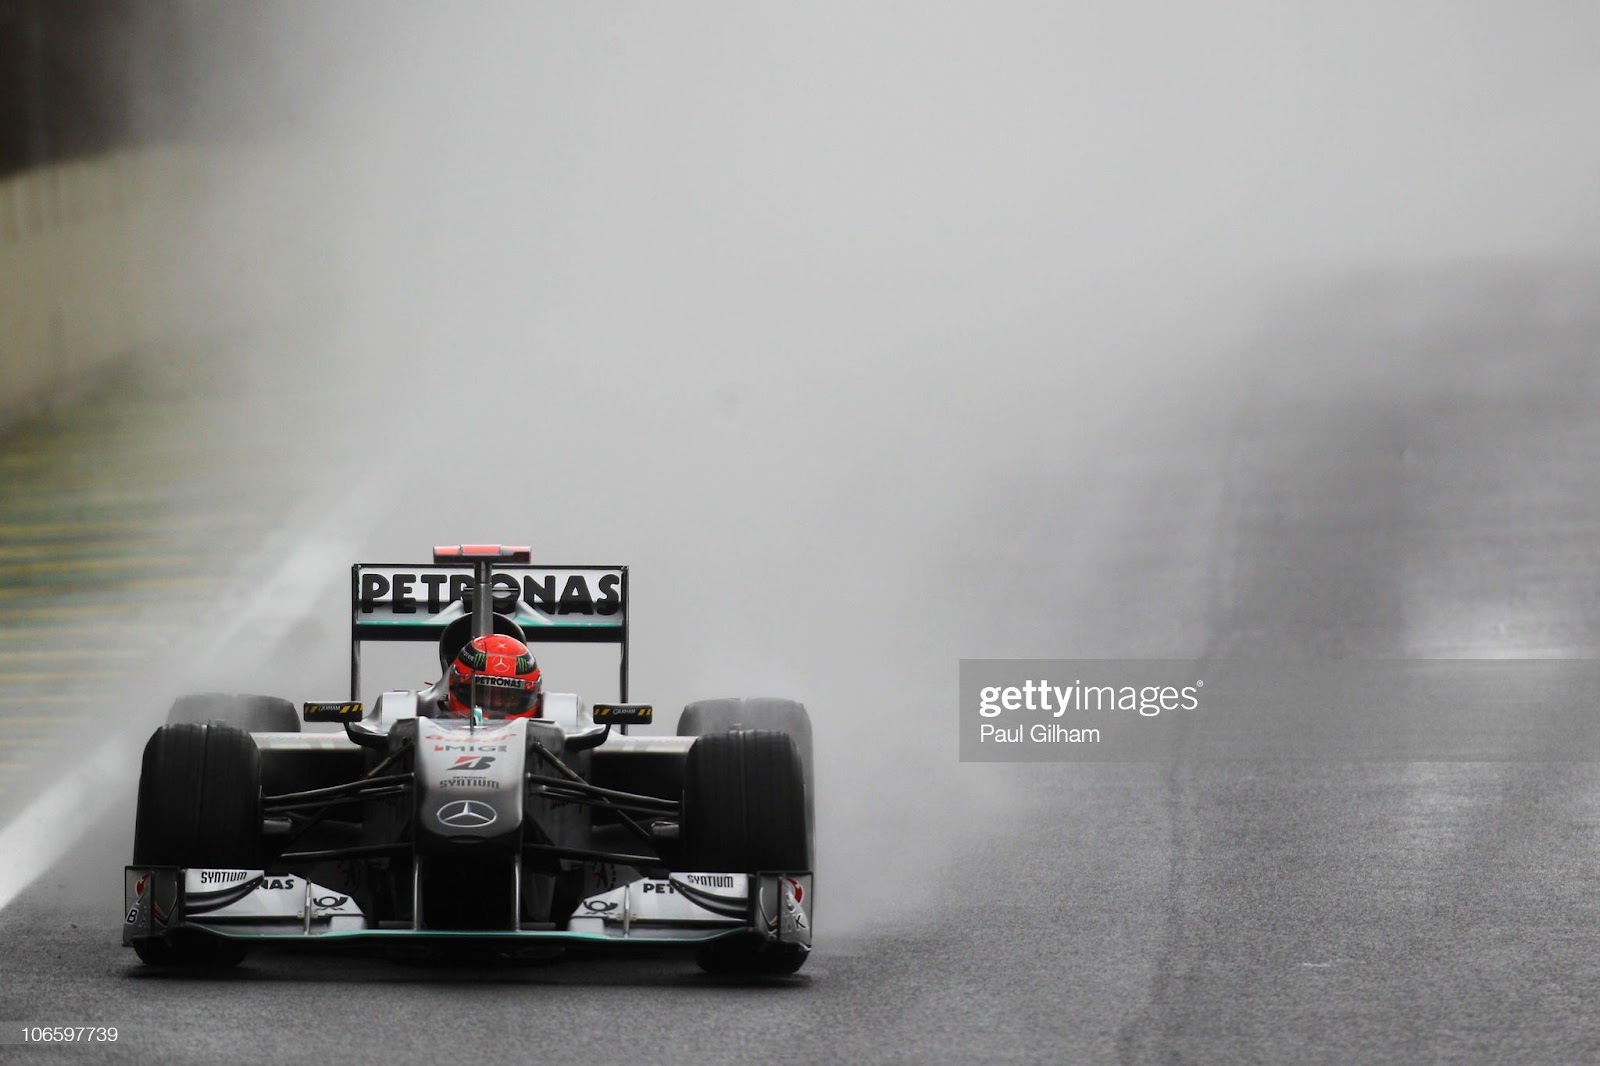 Michael Schumacher, Mercedes GP, drives during final practice prior to qualifying for the Brazilian F1 Grand Prix at the Interlagos Circuit on November 6, 2010 in Sao Paulo.